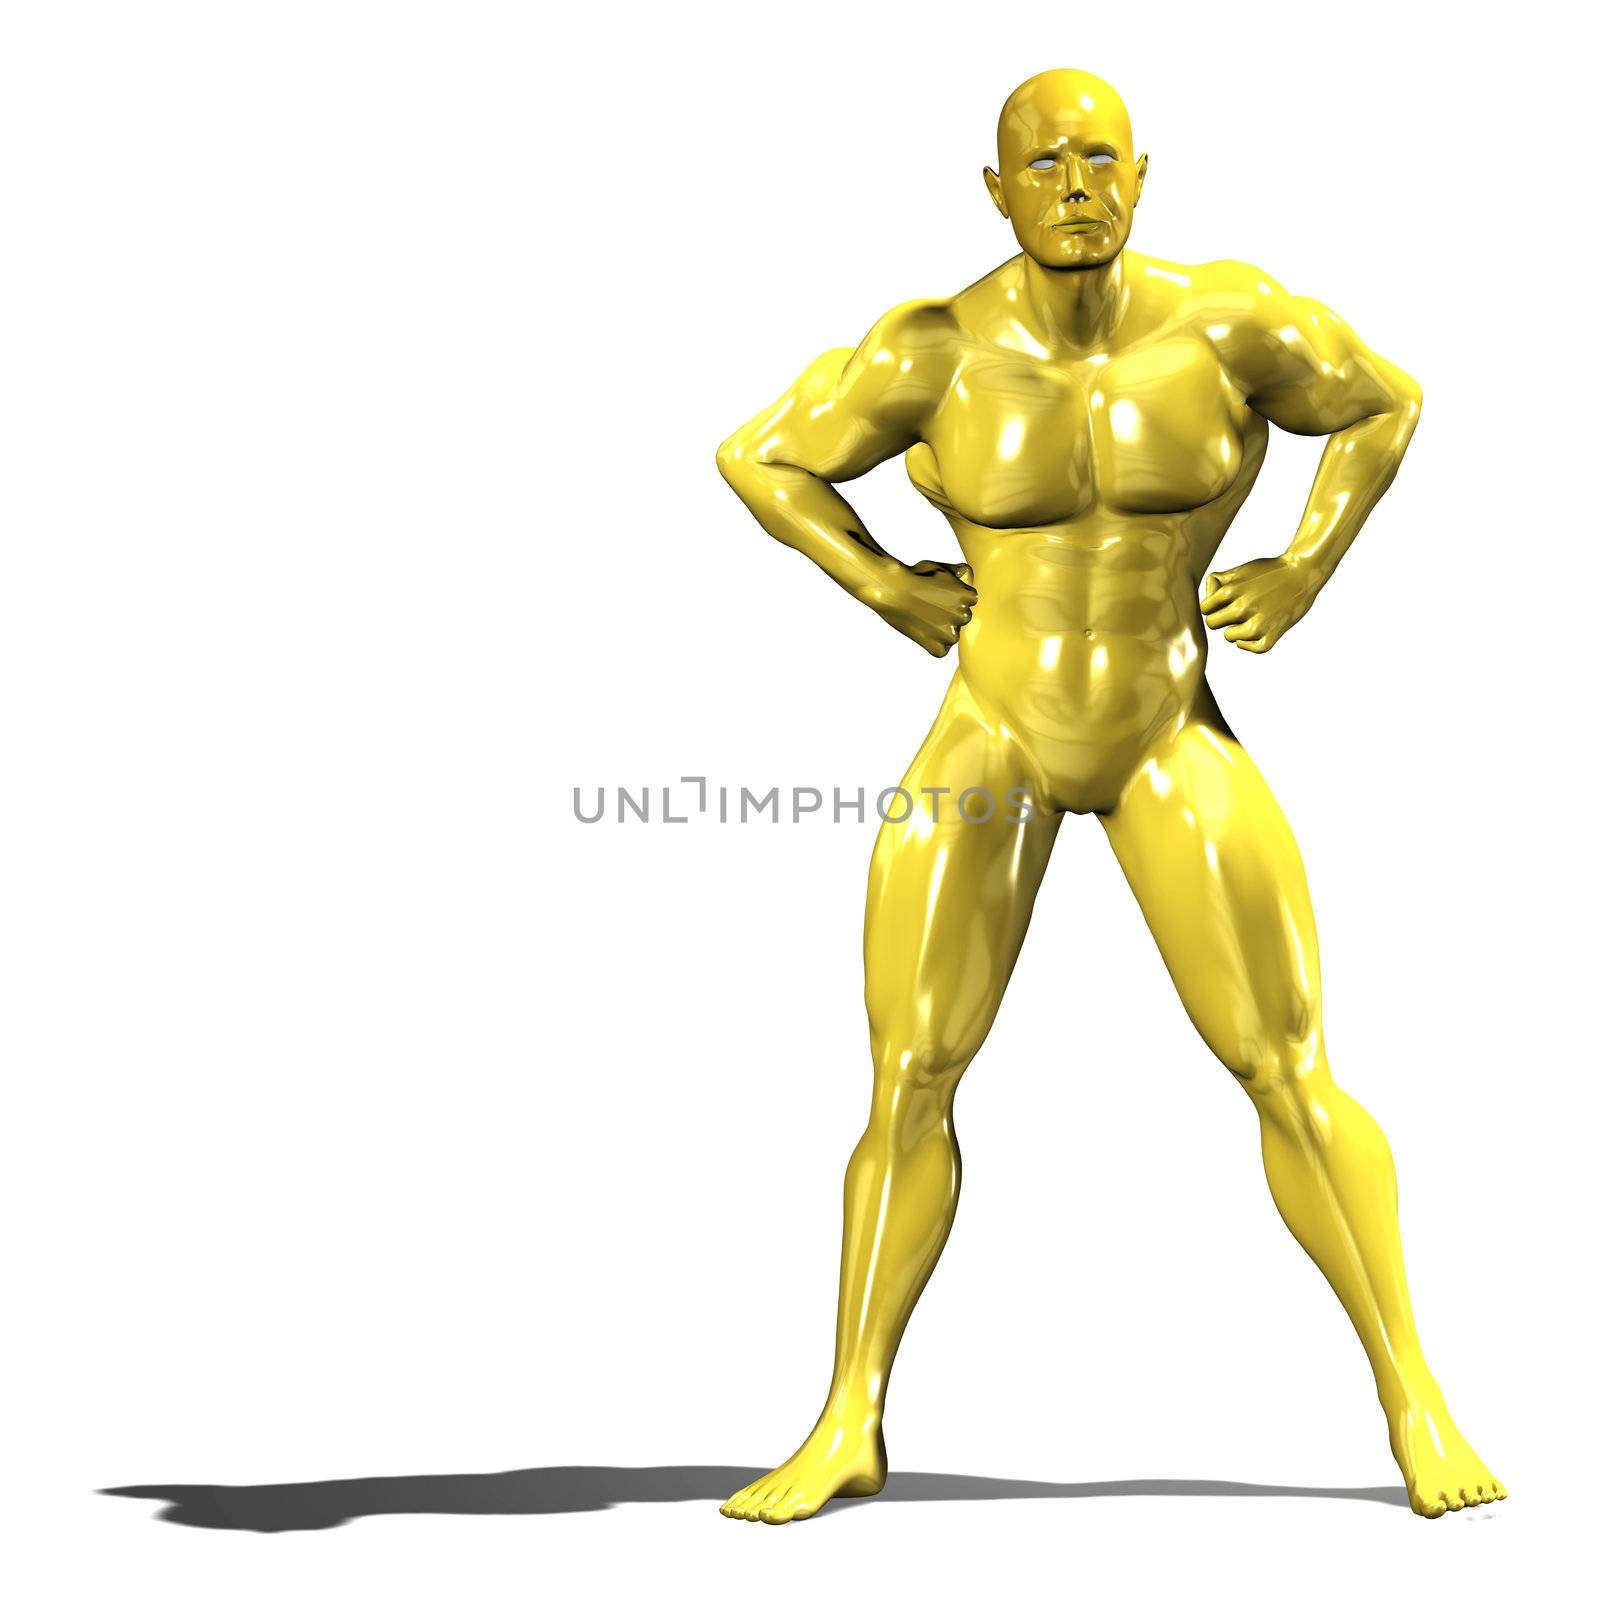 Gold hero man statue in confident standing pose. Isolated on white